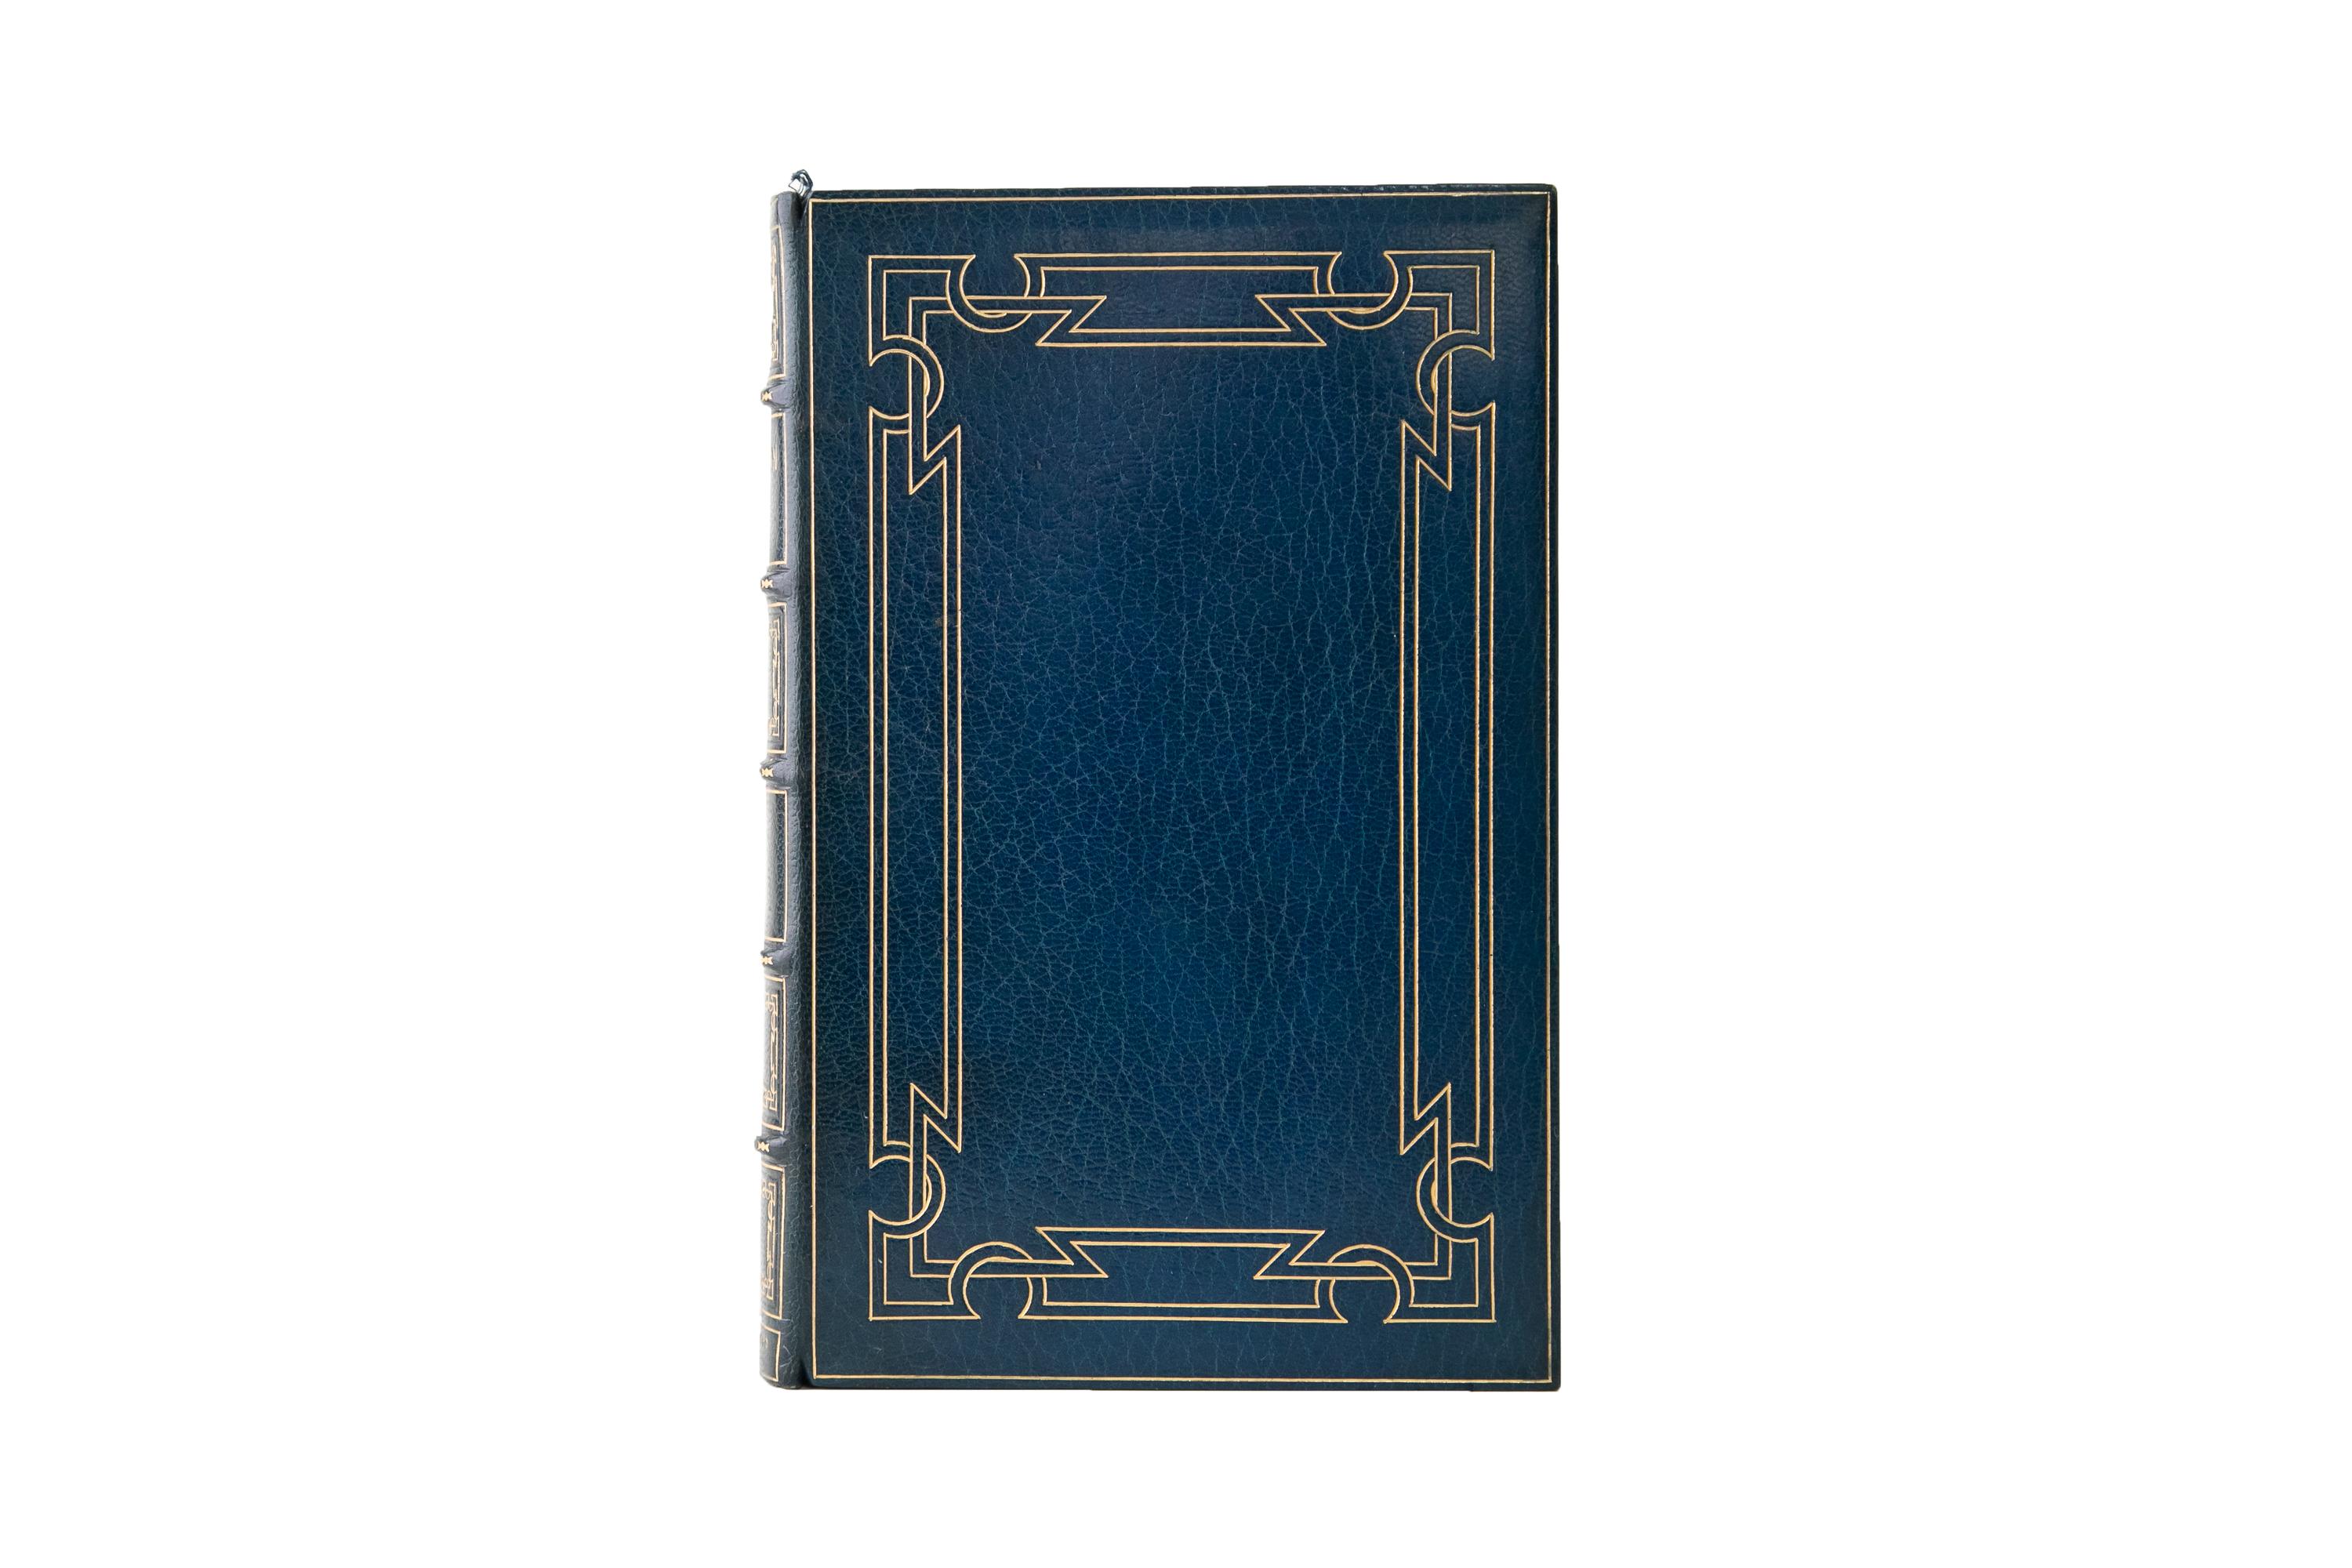 2 Volumes. W. Fraser Rae, Sheridan: A Bibliography. Extra-Illustrated Edition. Bound by Bayntun in full blue morocco with the covers displaying an intricate gilt-tooled border. The spines display raised bands, intricate panel bordering, and label